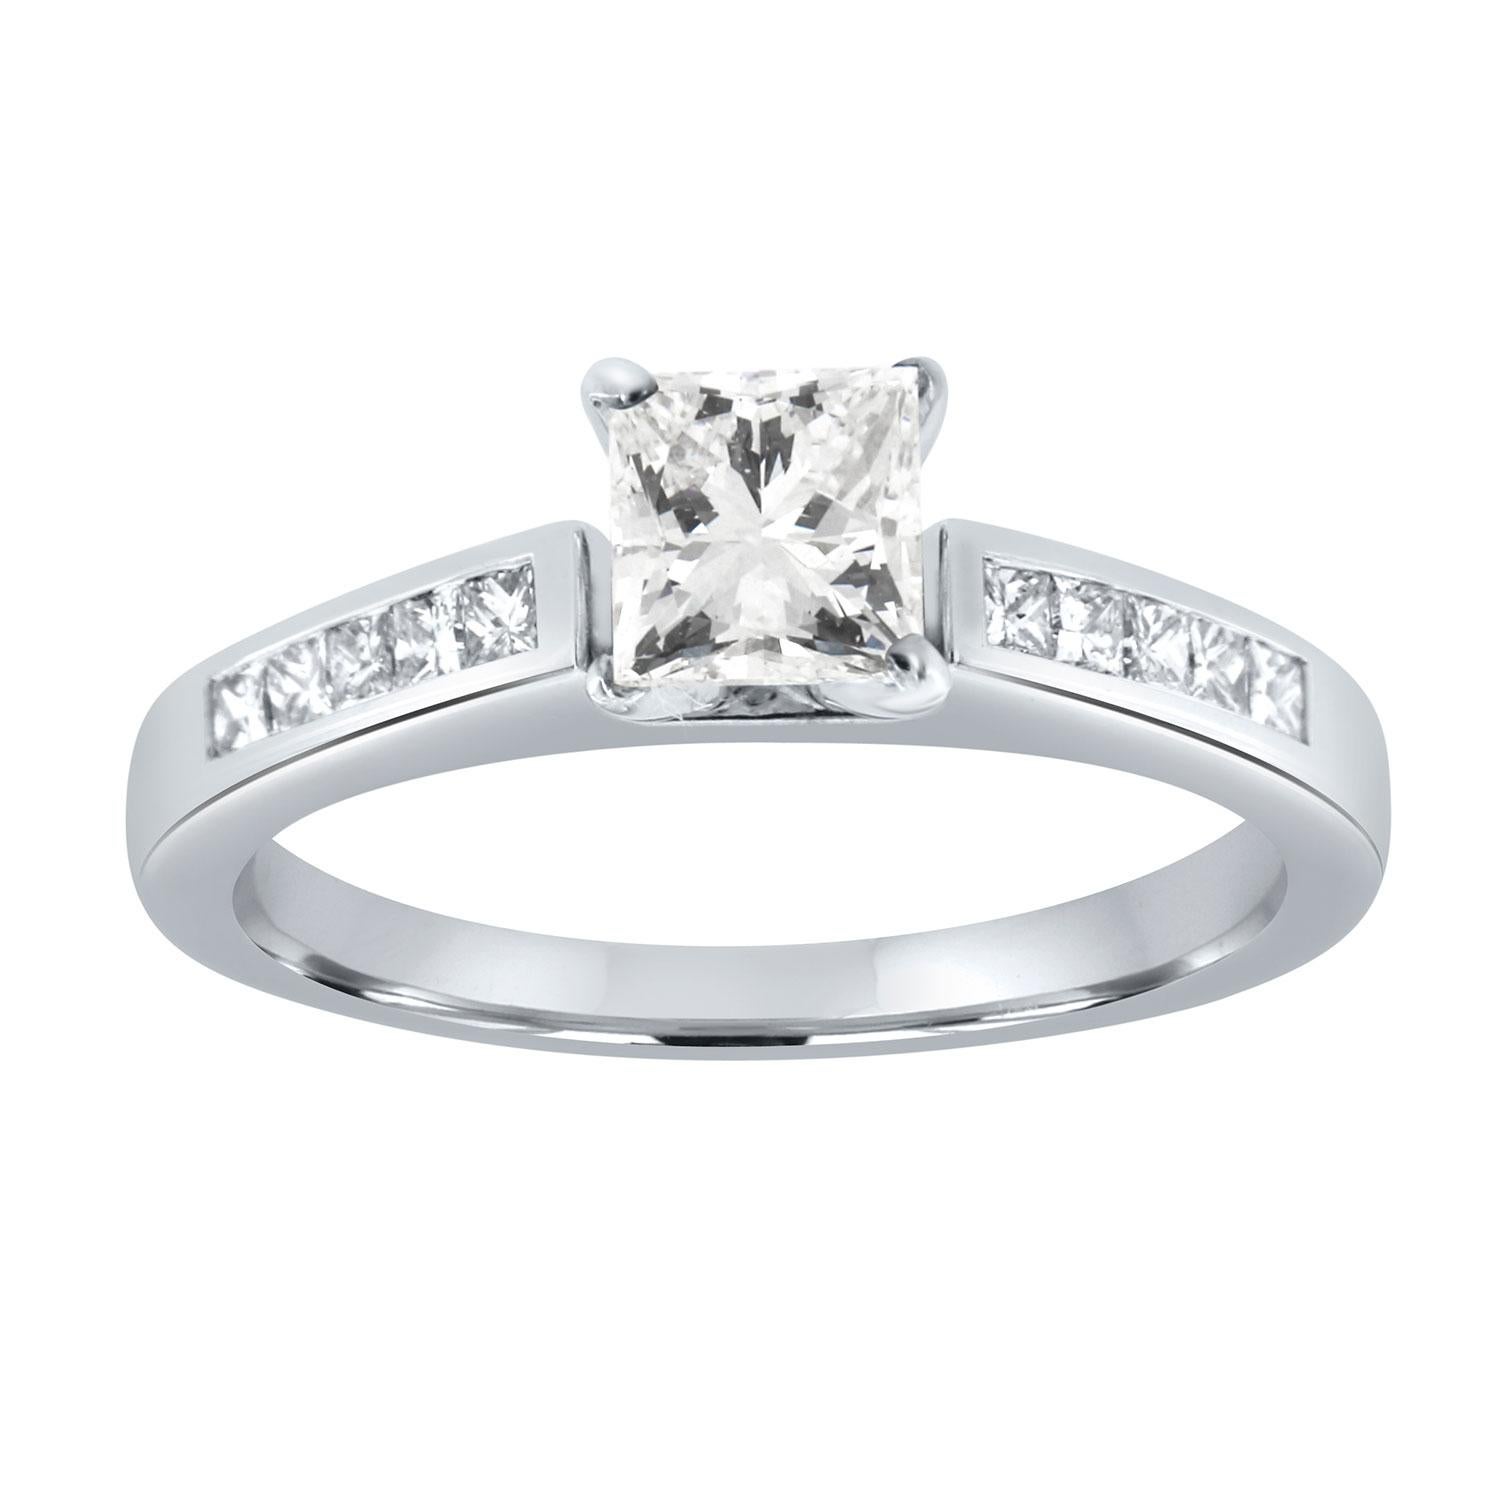 This 18k white gold ring features a 0.71 Carat Princes-shaped Natural Diamond EGL USA Certified as G color and VS2 in clarity with an excellent luster on a 2.5 mm wide Diamond band. A perfectly matched diamond band that contains a princess cut